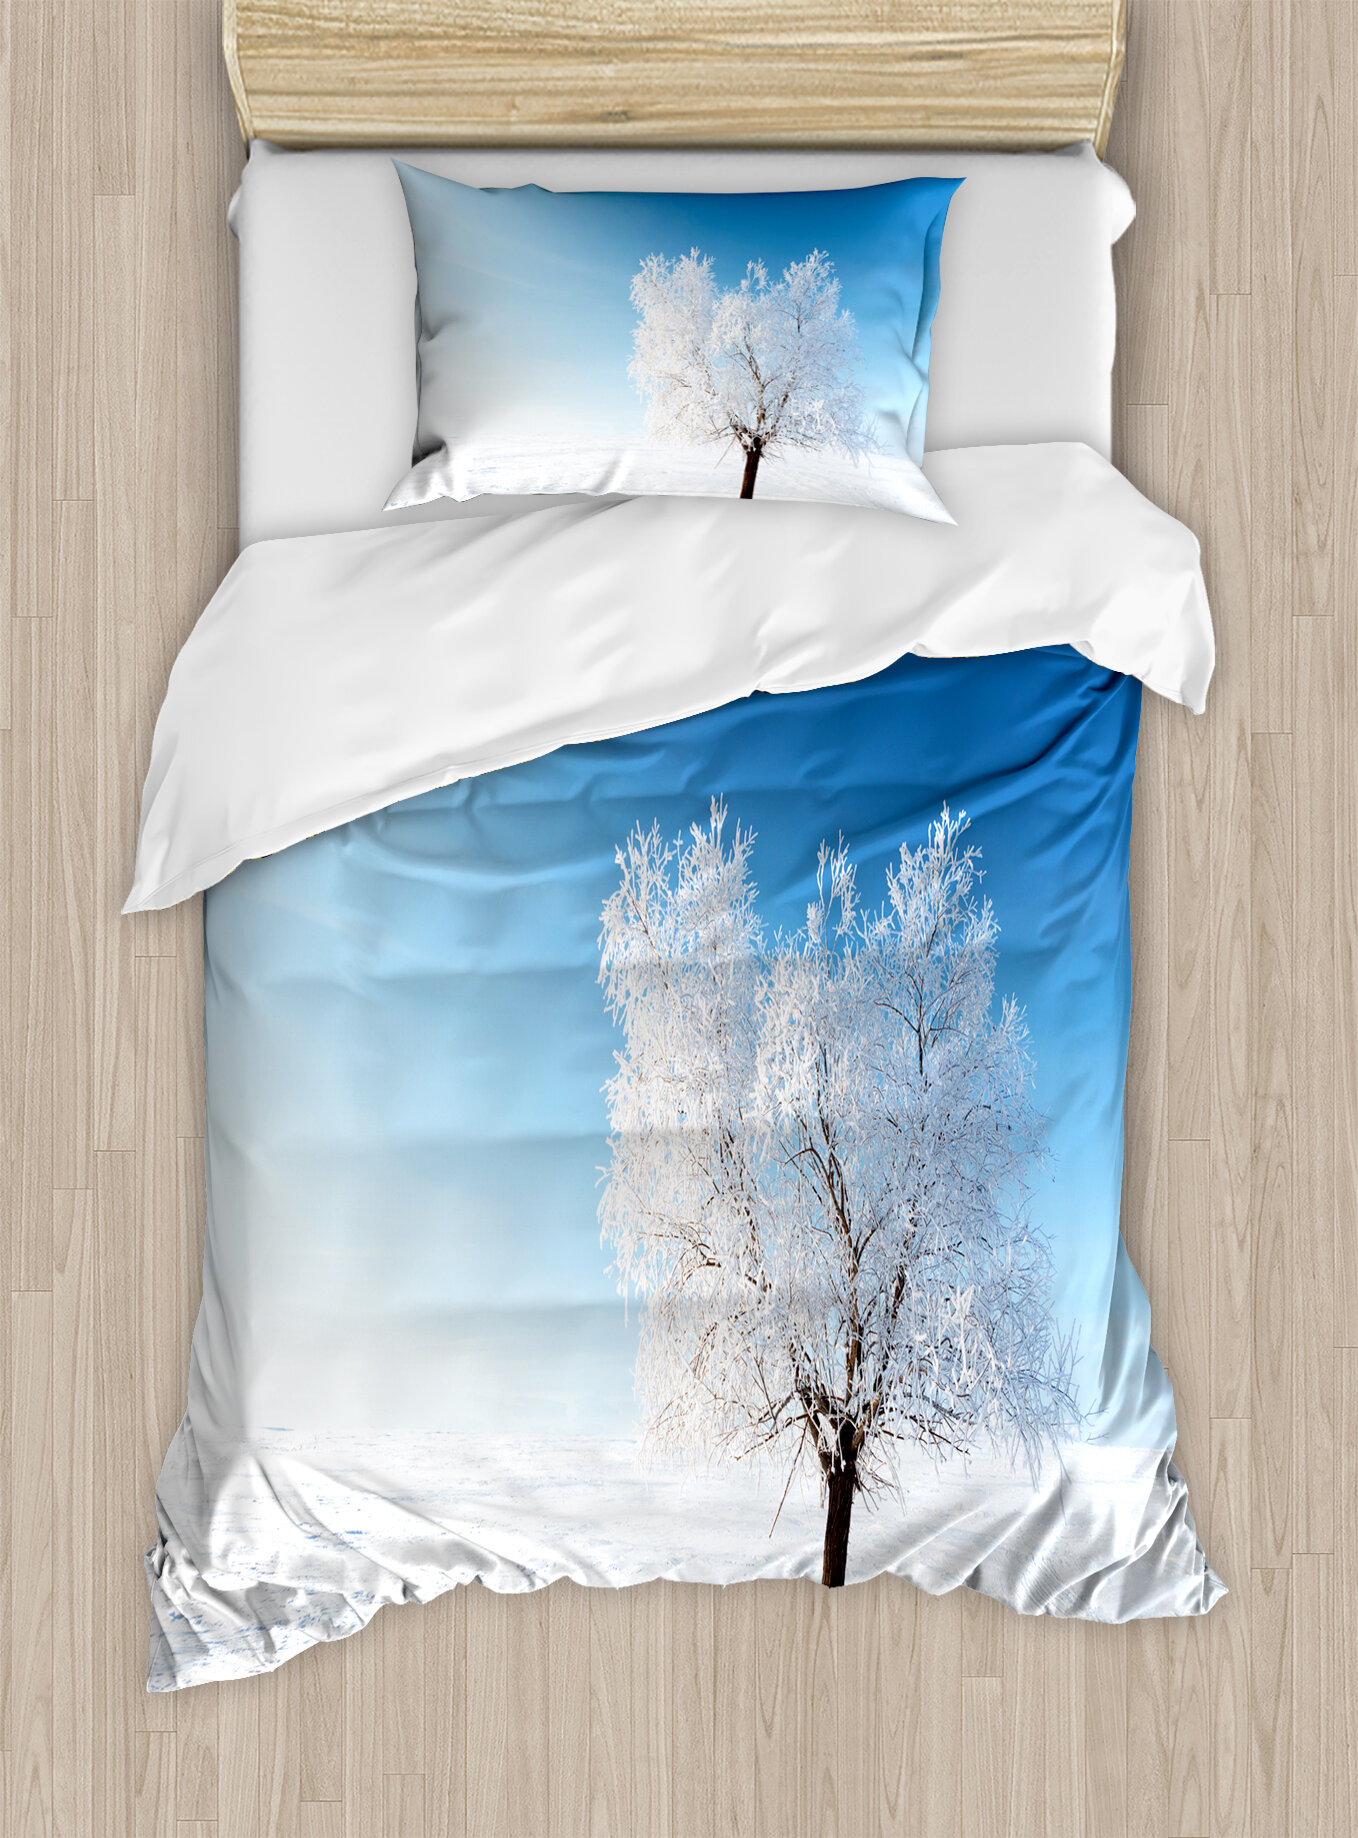 East Urban Home Winter Single Tree On Snow Cover Field With